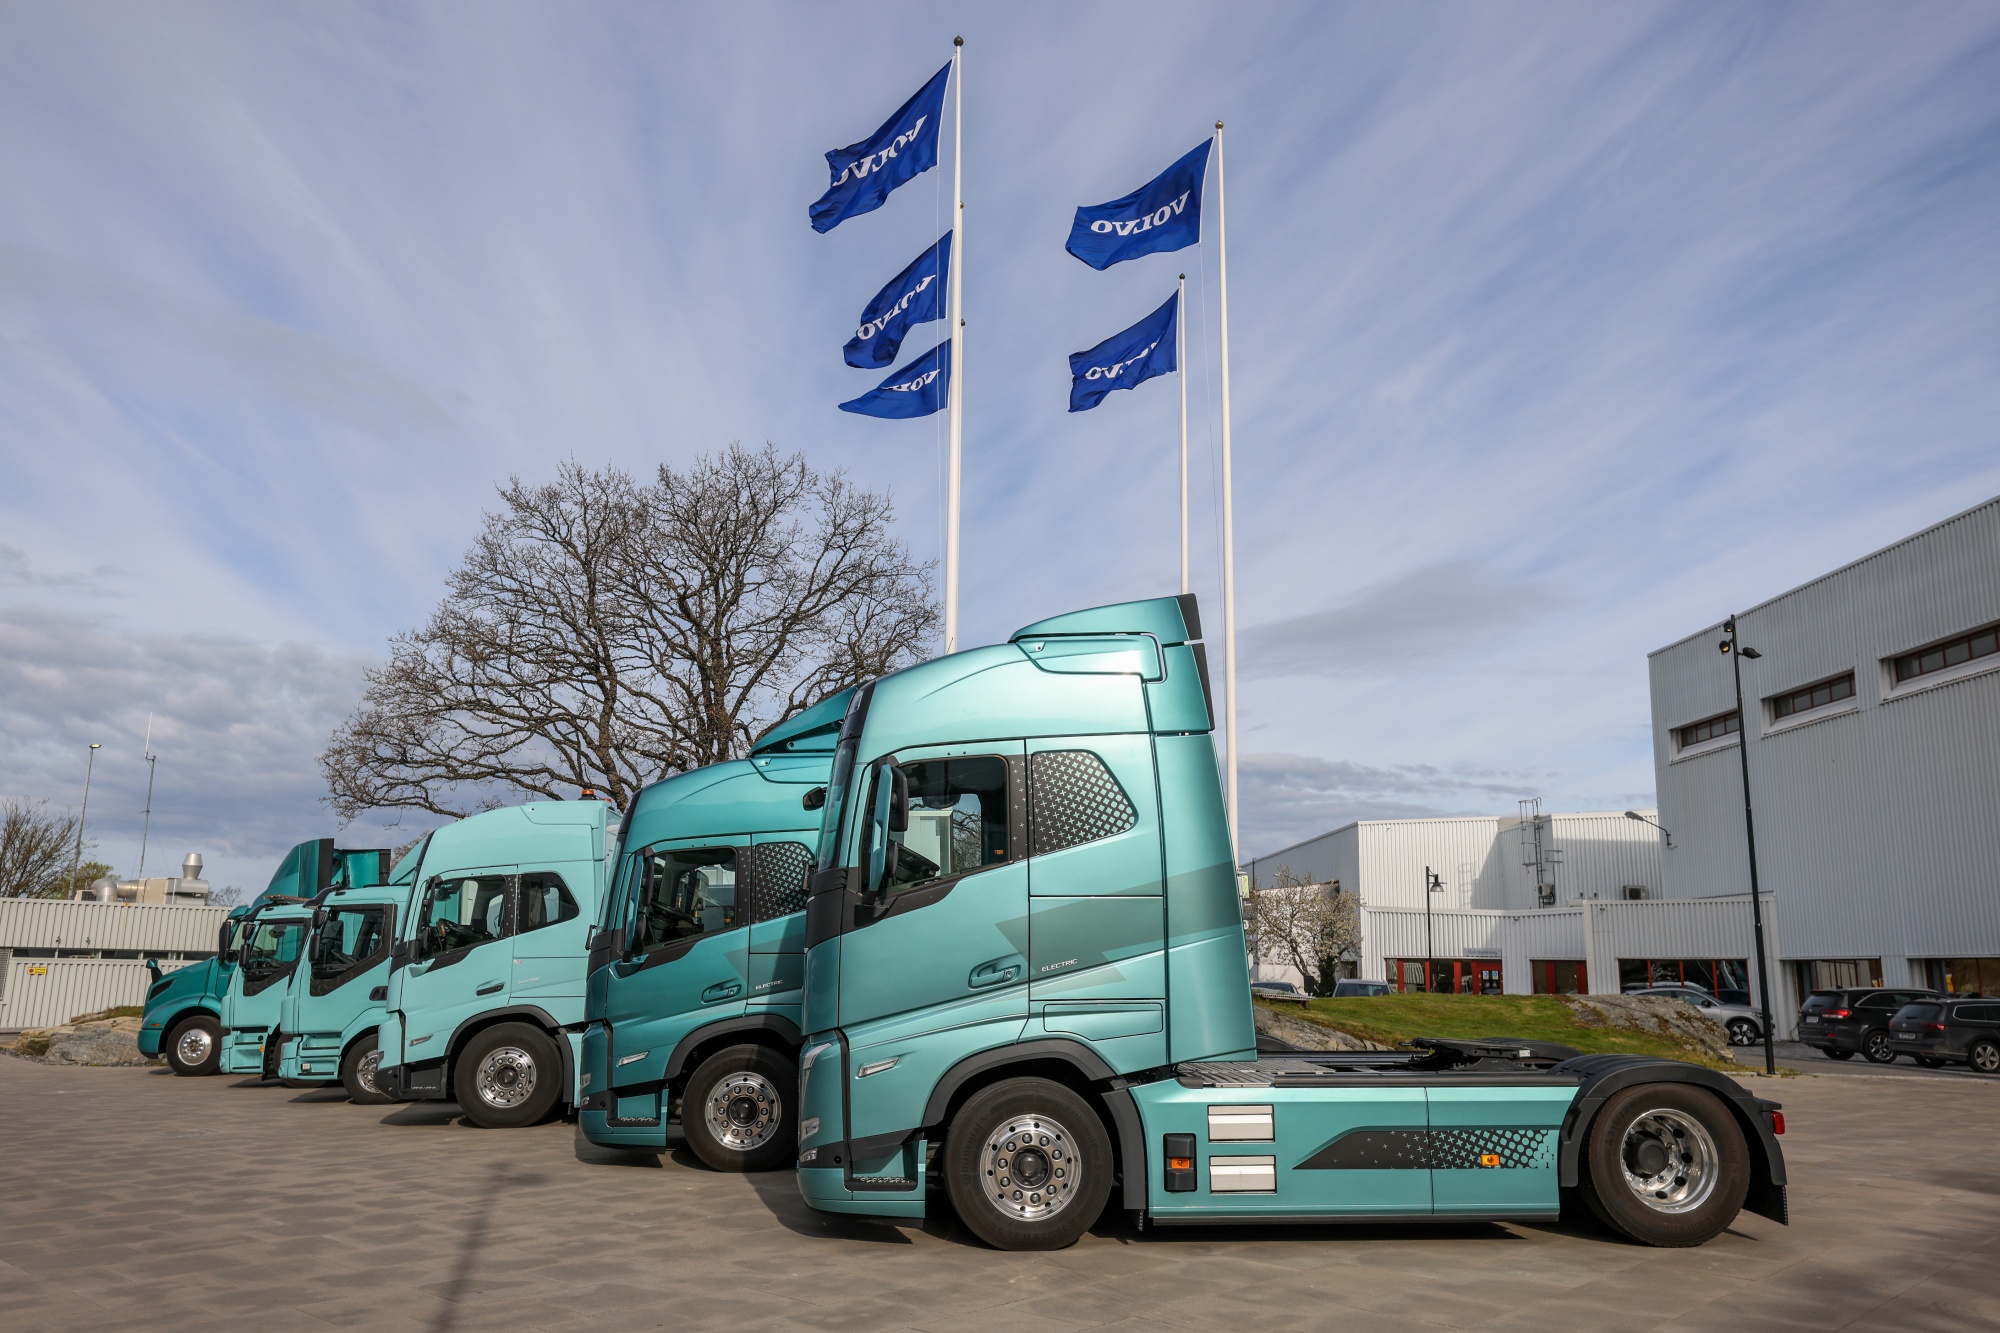 Geely Announces $1.3 Billion Stock Sale of Volvo Truck Shares